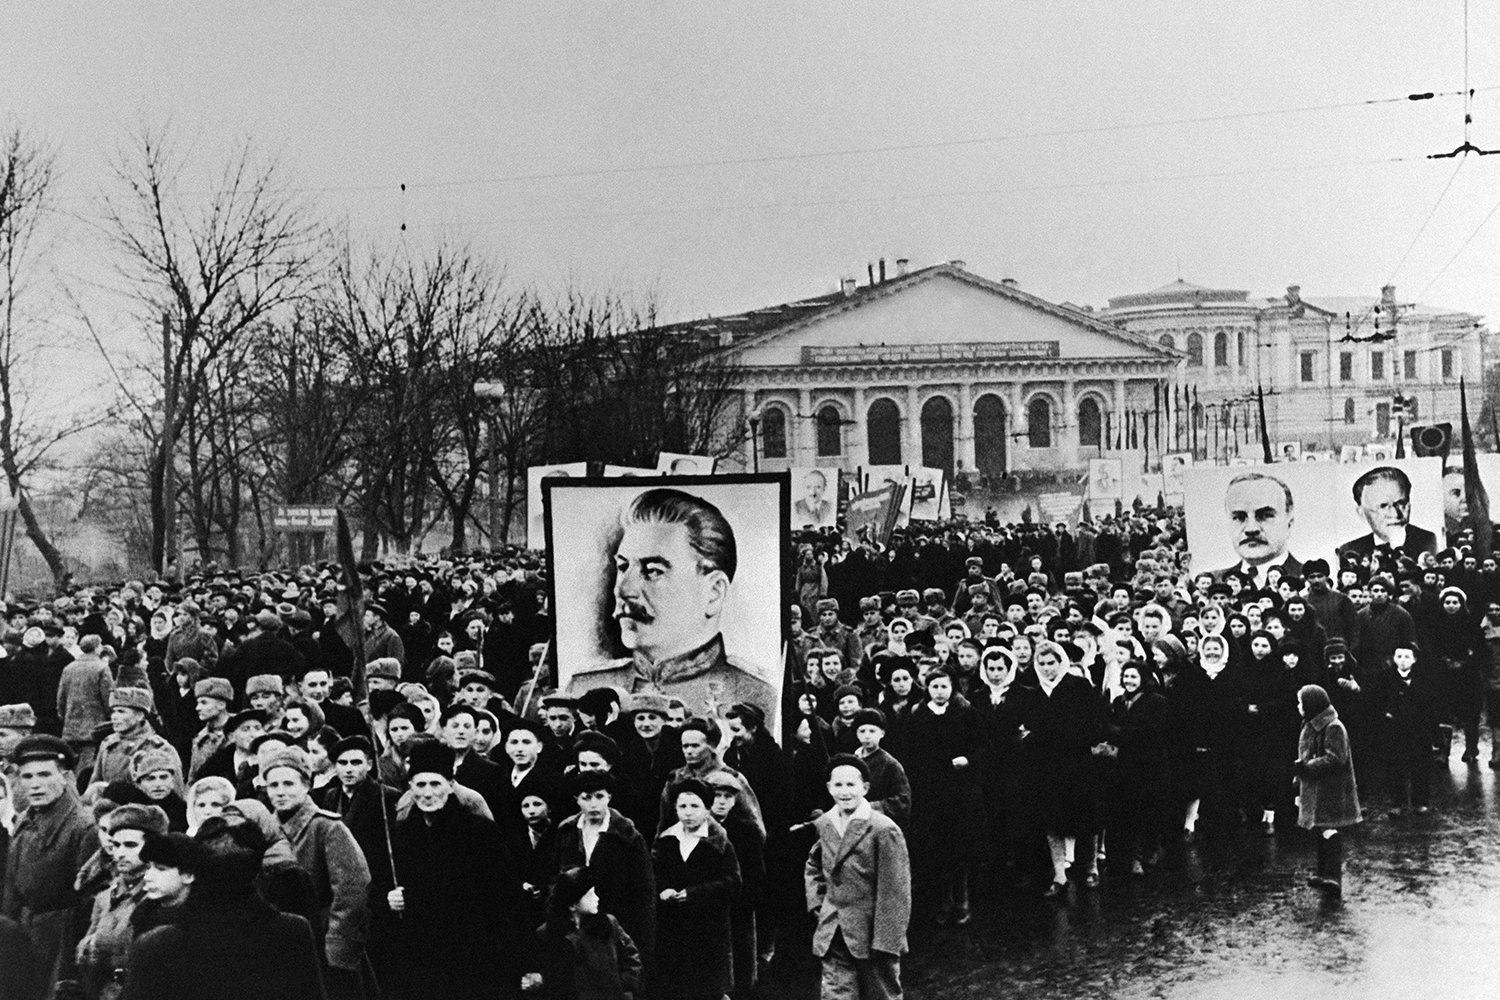 People carry posters of Soviet leader Joseph Stalin and other Soviet leaders in Moscow.